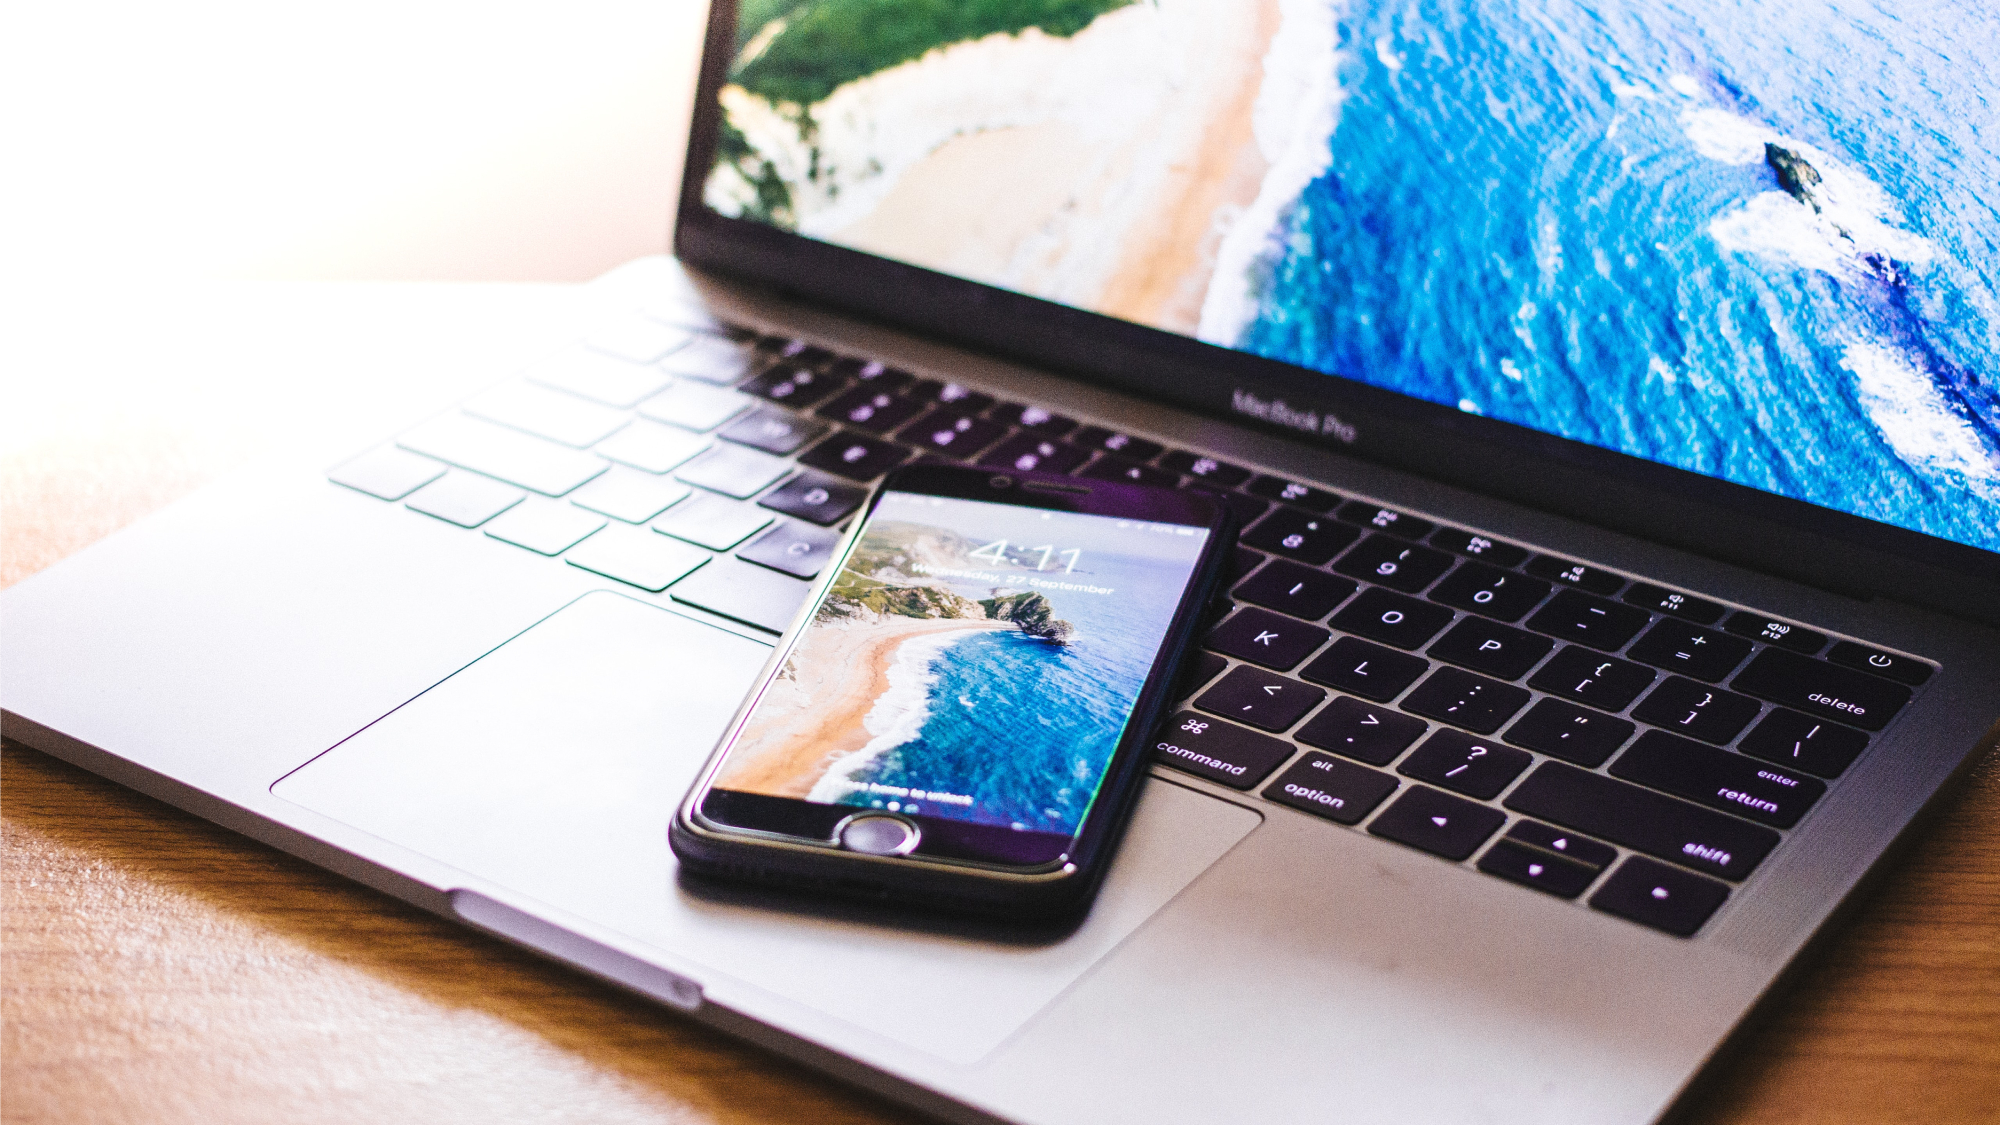 The most effective ways to back up your precious photos to the cloud